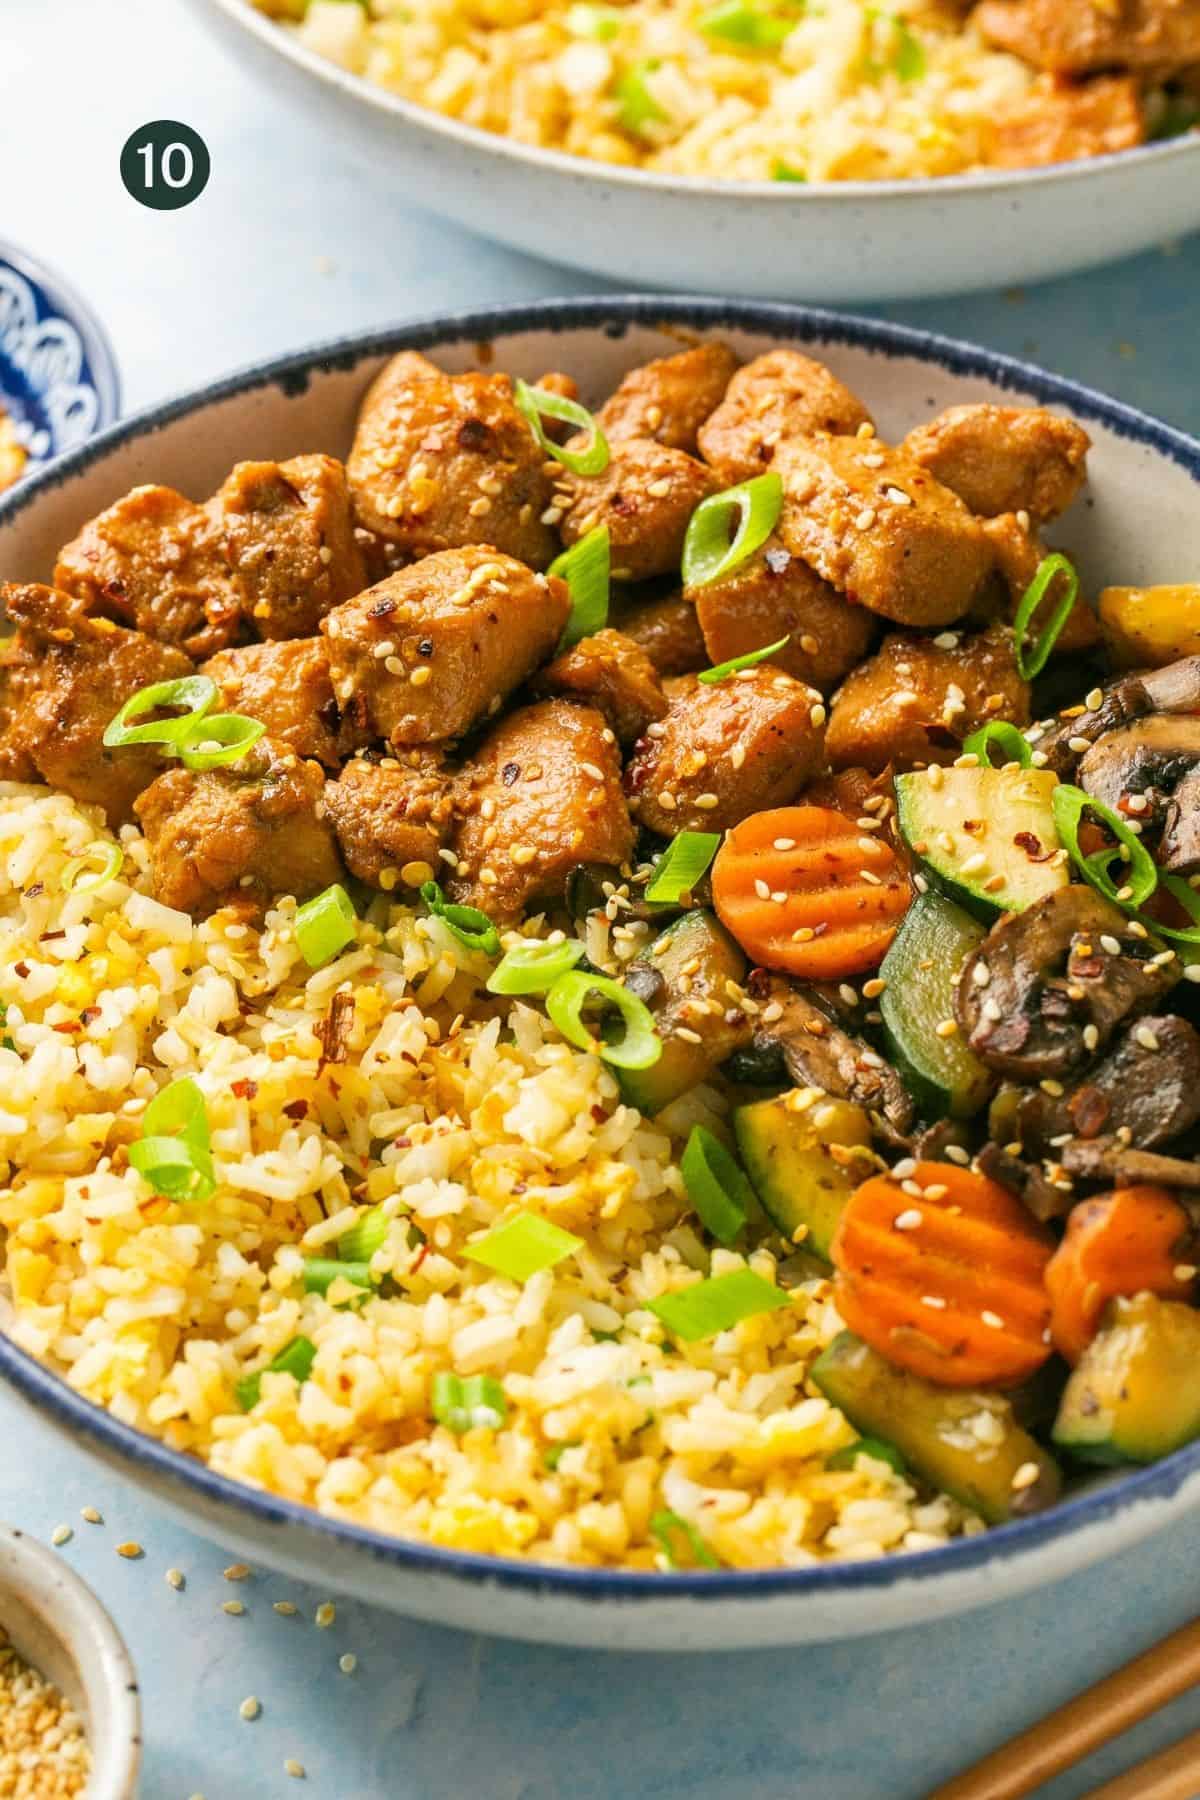 Close up image of the assembled hibachi bowls with marinated cooked chicken breast, fried rice and sauteed vegetables with green onions and sesame seeds on top. 